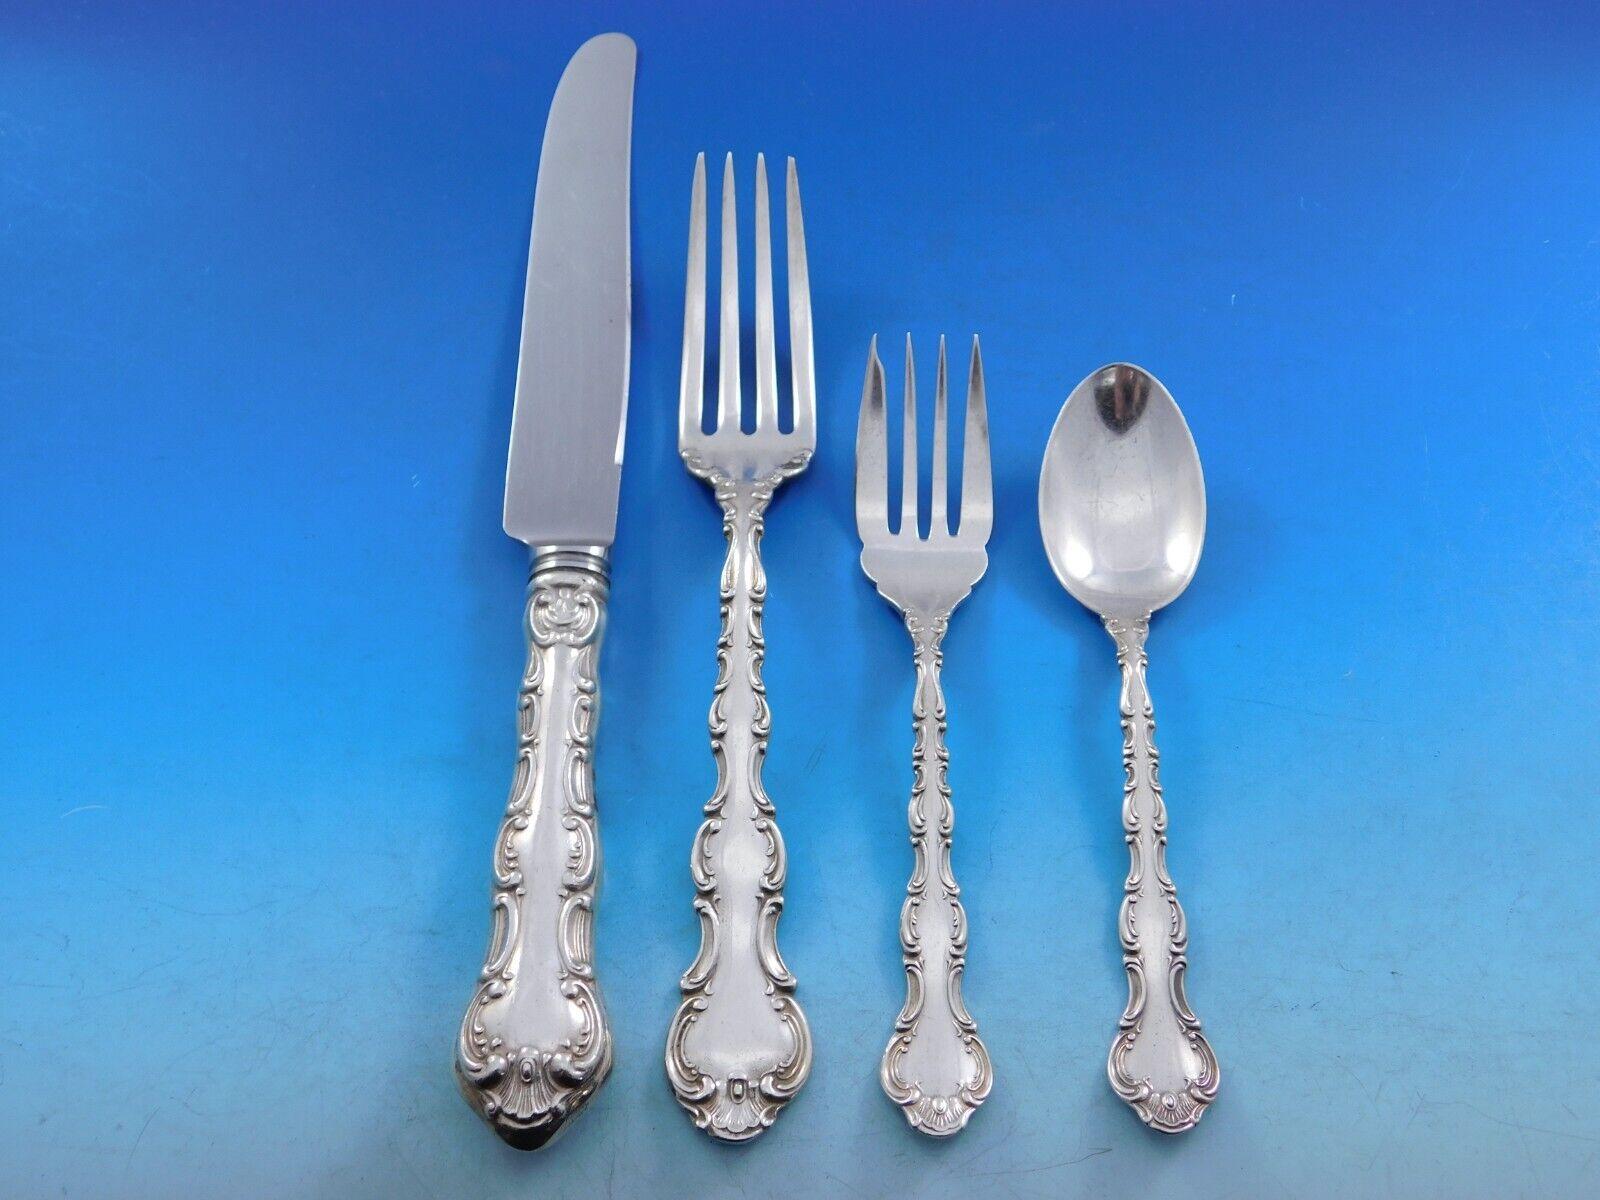 Dinner Size Pompadour by Birks (Canada) sterling silver Flatware set, 100 pieces. This pattern looks like Strasbourg by Gorham. This set includes:

8 Dinner Knives, 10